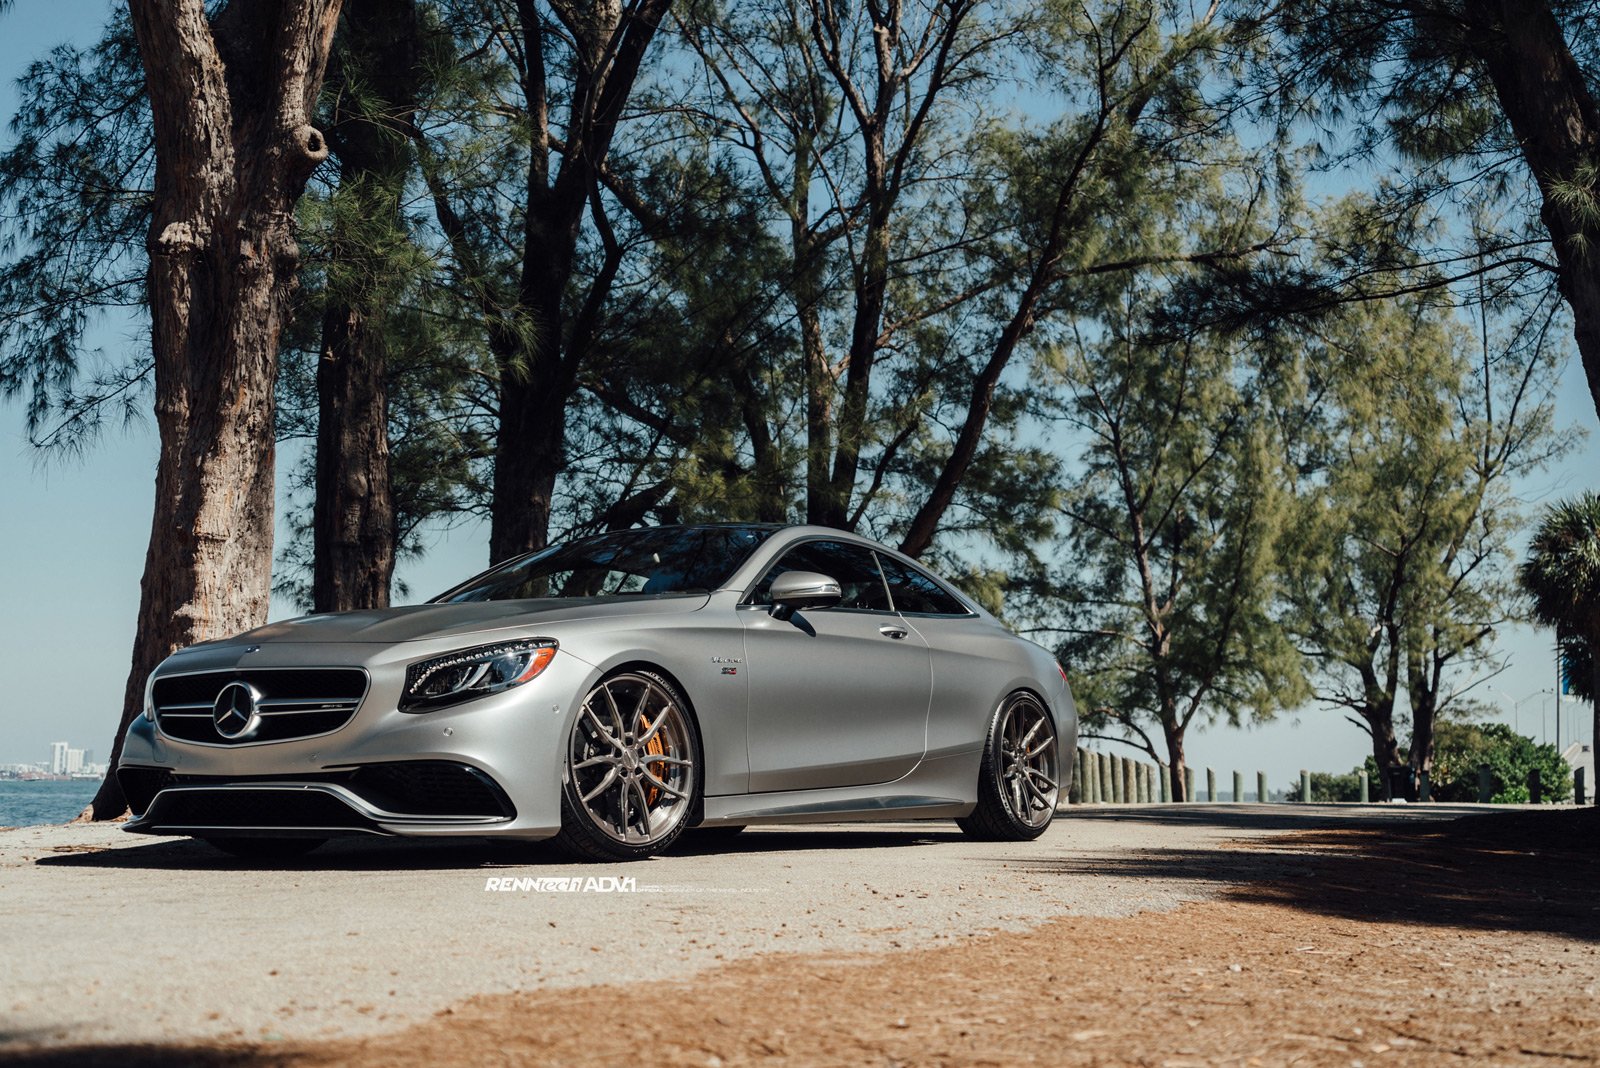 2015, Adv1, Cars, Coupe, Tuning, Wheels, Mercedes, S63, Amg, Renntech Wallpaper